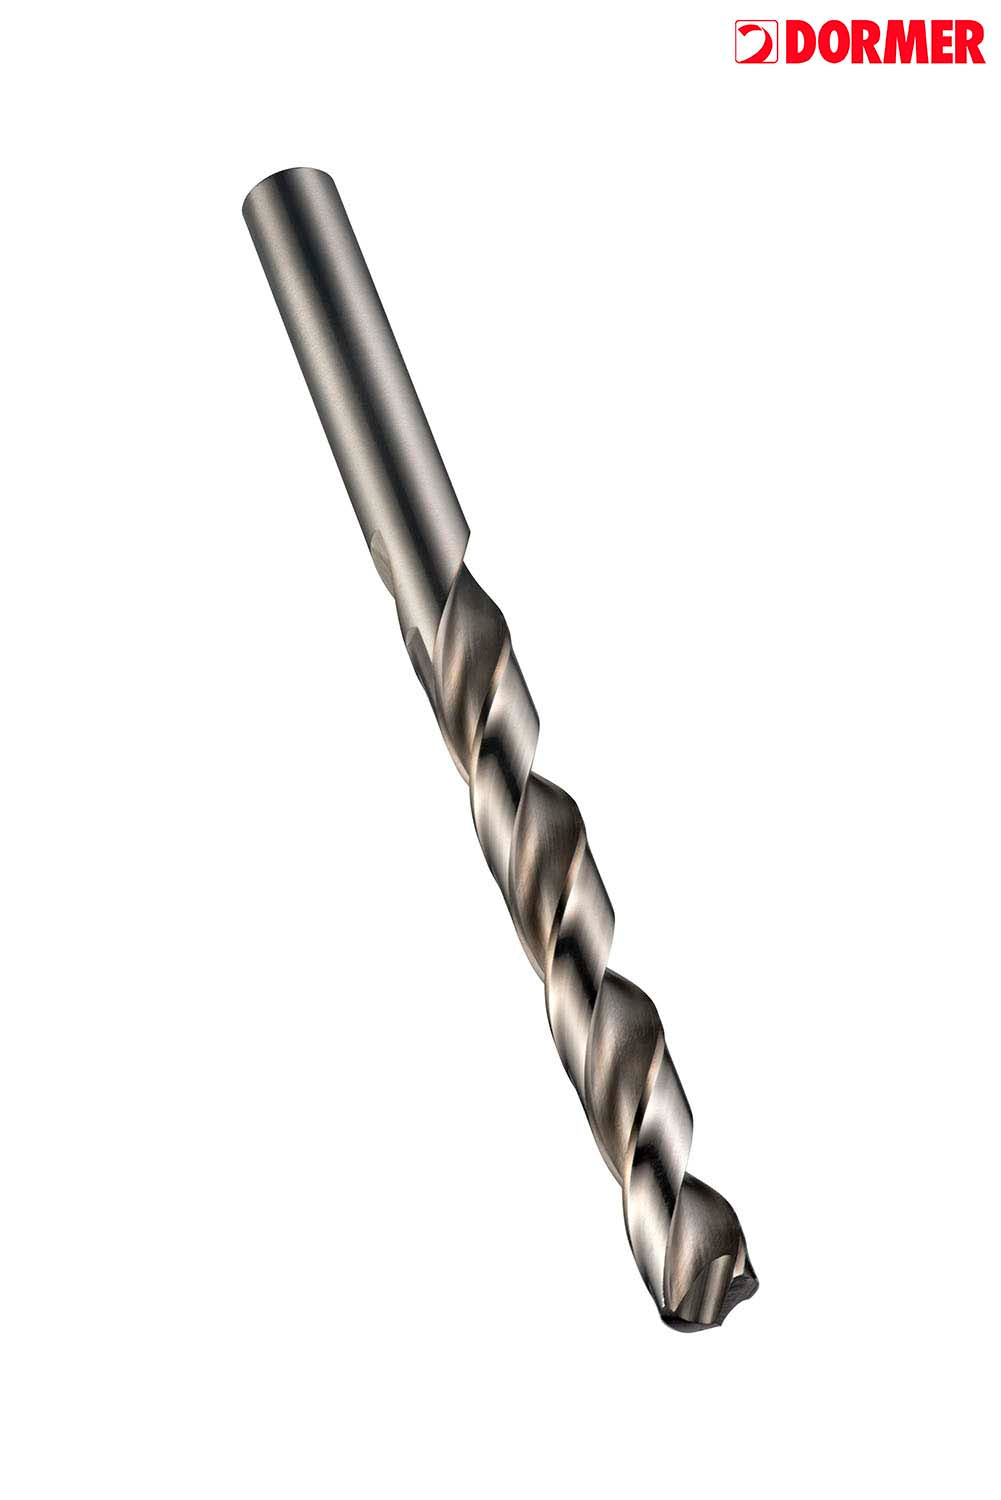 Cobalt Drill Bits 3.0mm for Stainless